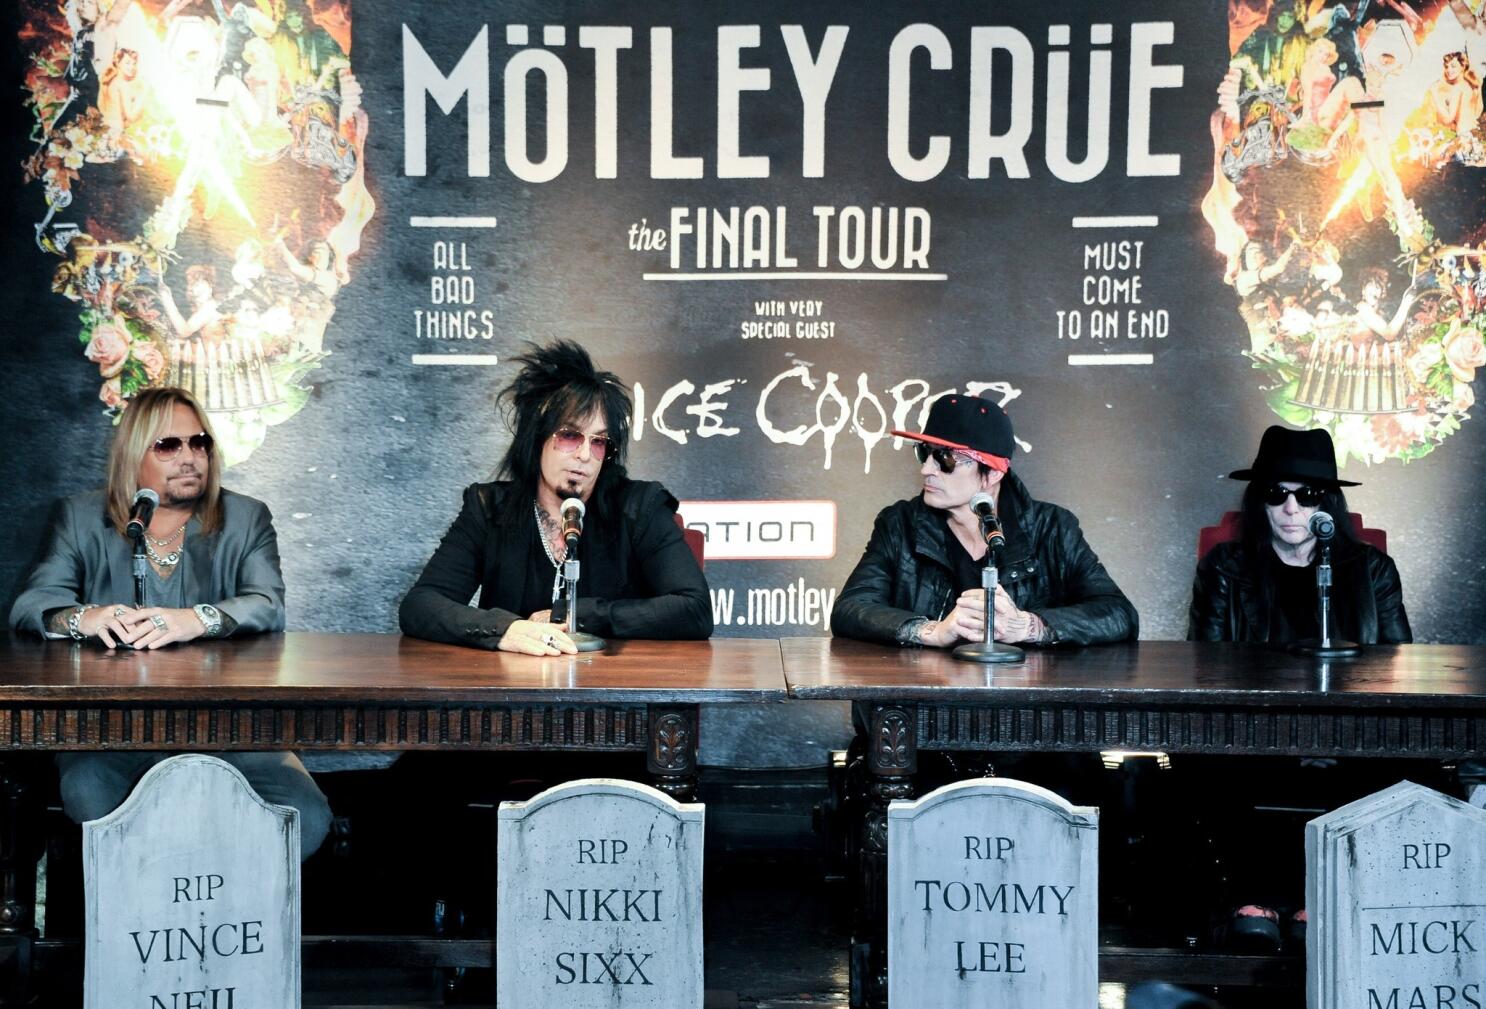 Mötley Crüe to reunite, four years after final 'farewell' show, for tour  with Def Leppard, Poison, Joan Jett - The San Diego Union-Tribune